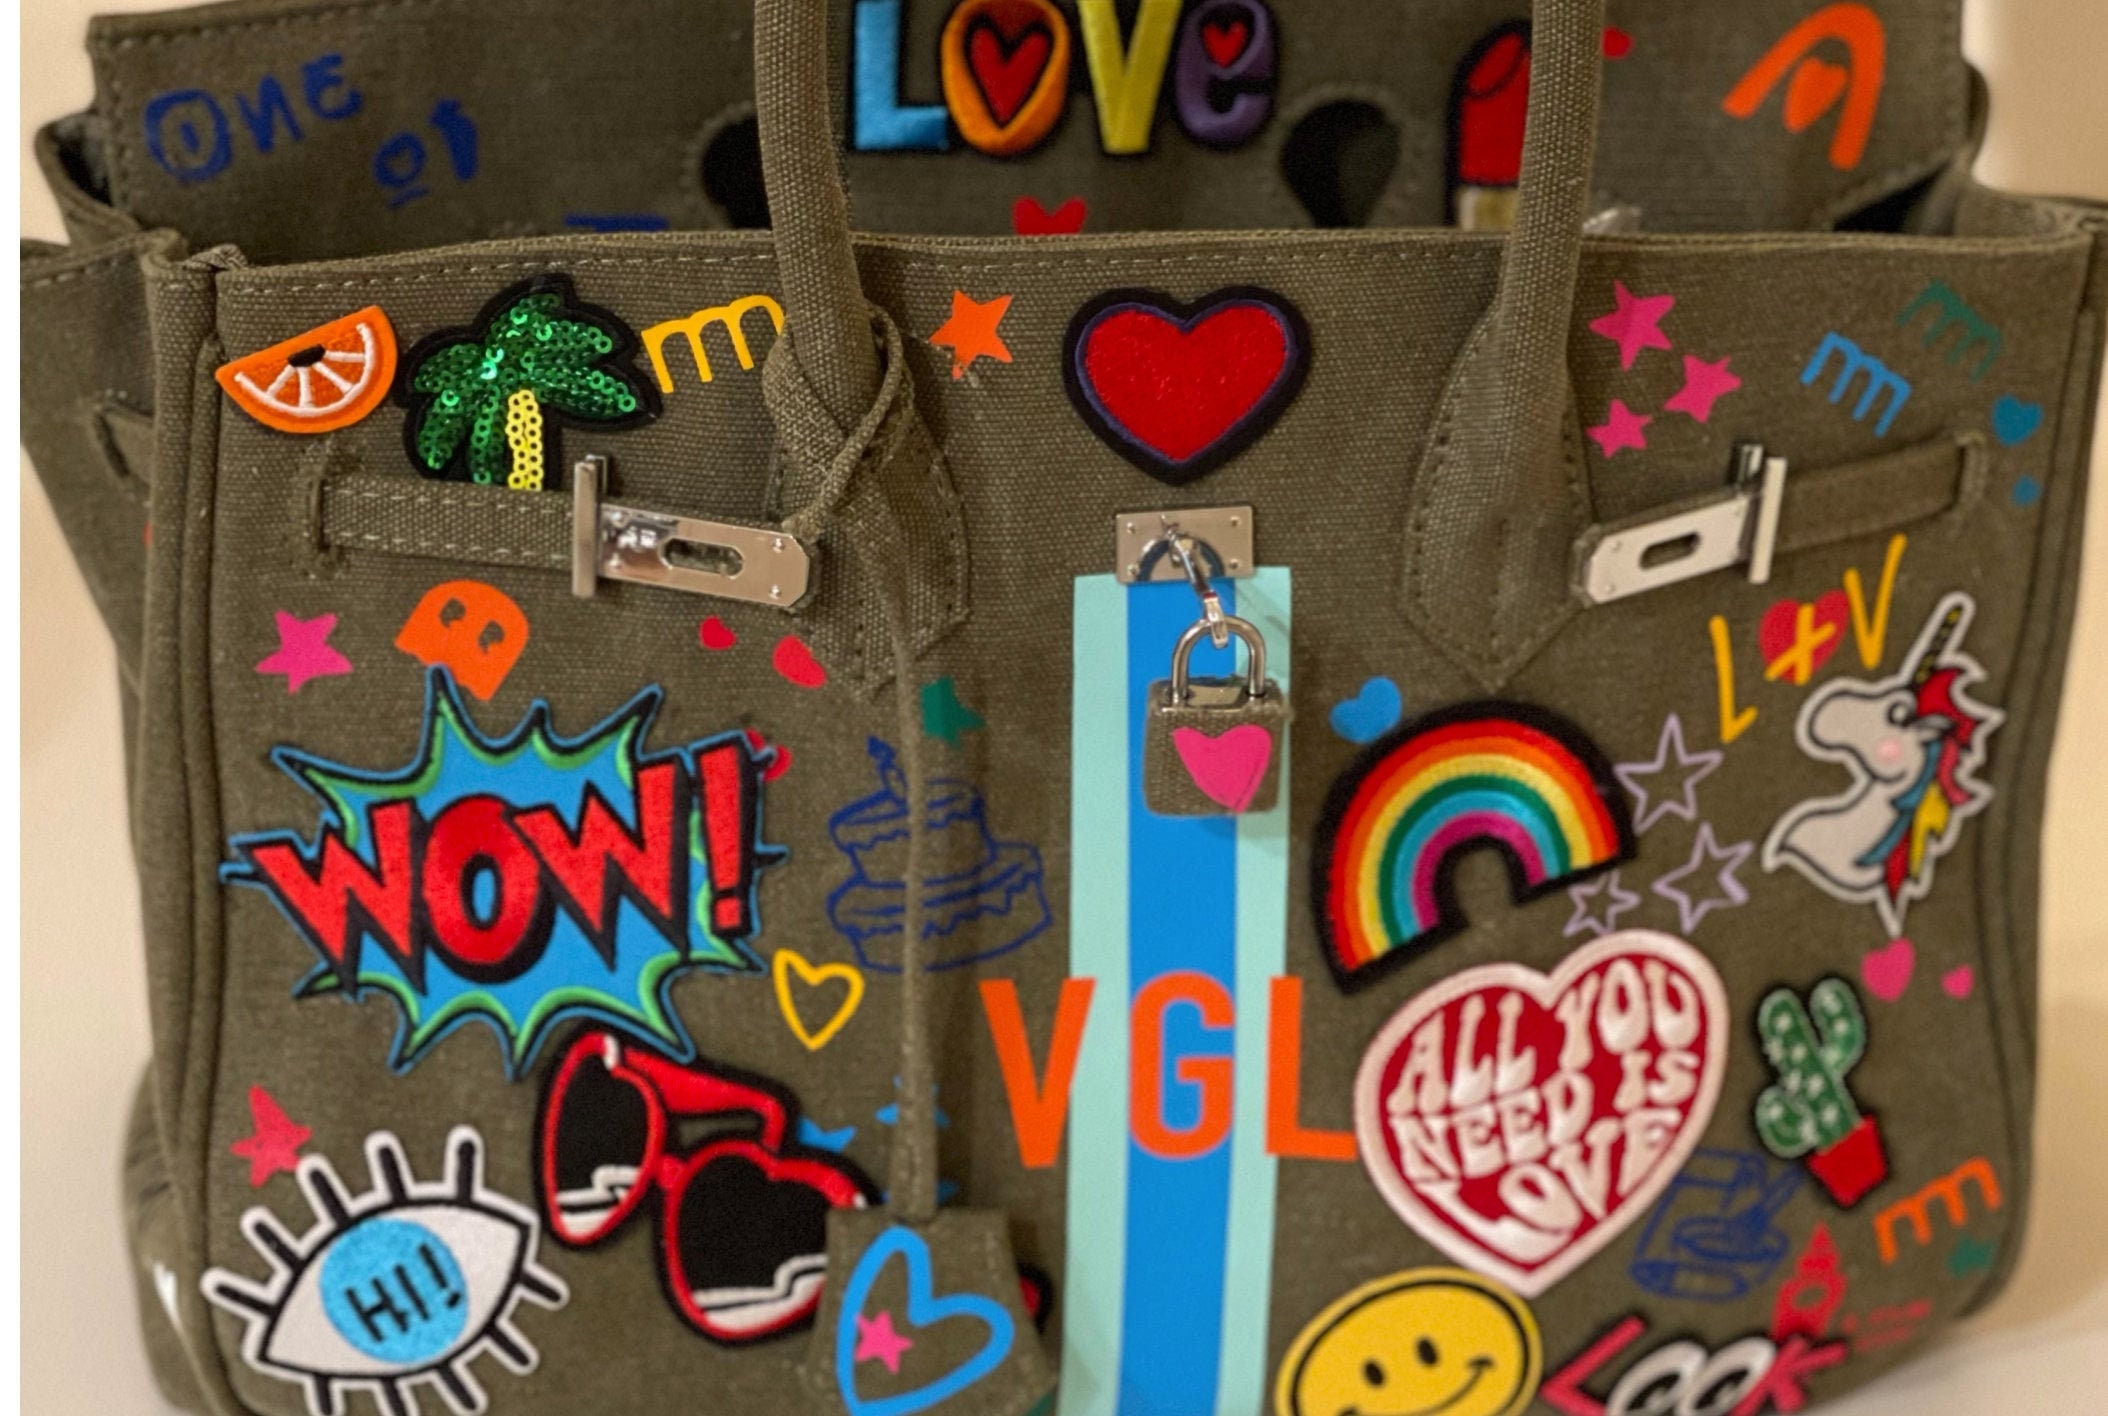 From graffiti to embroidery: Hermes Birkin bags customised by celebrities